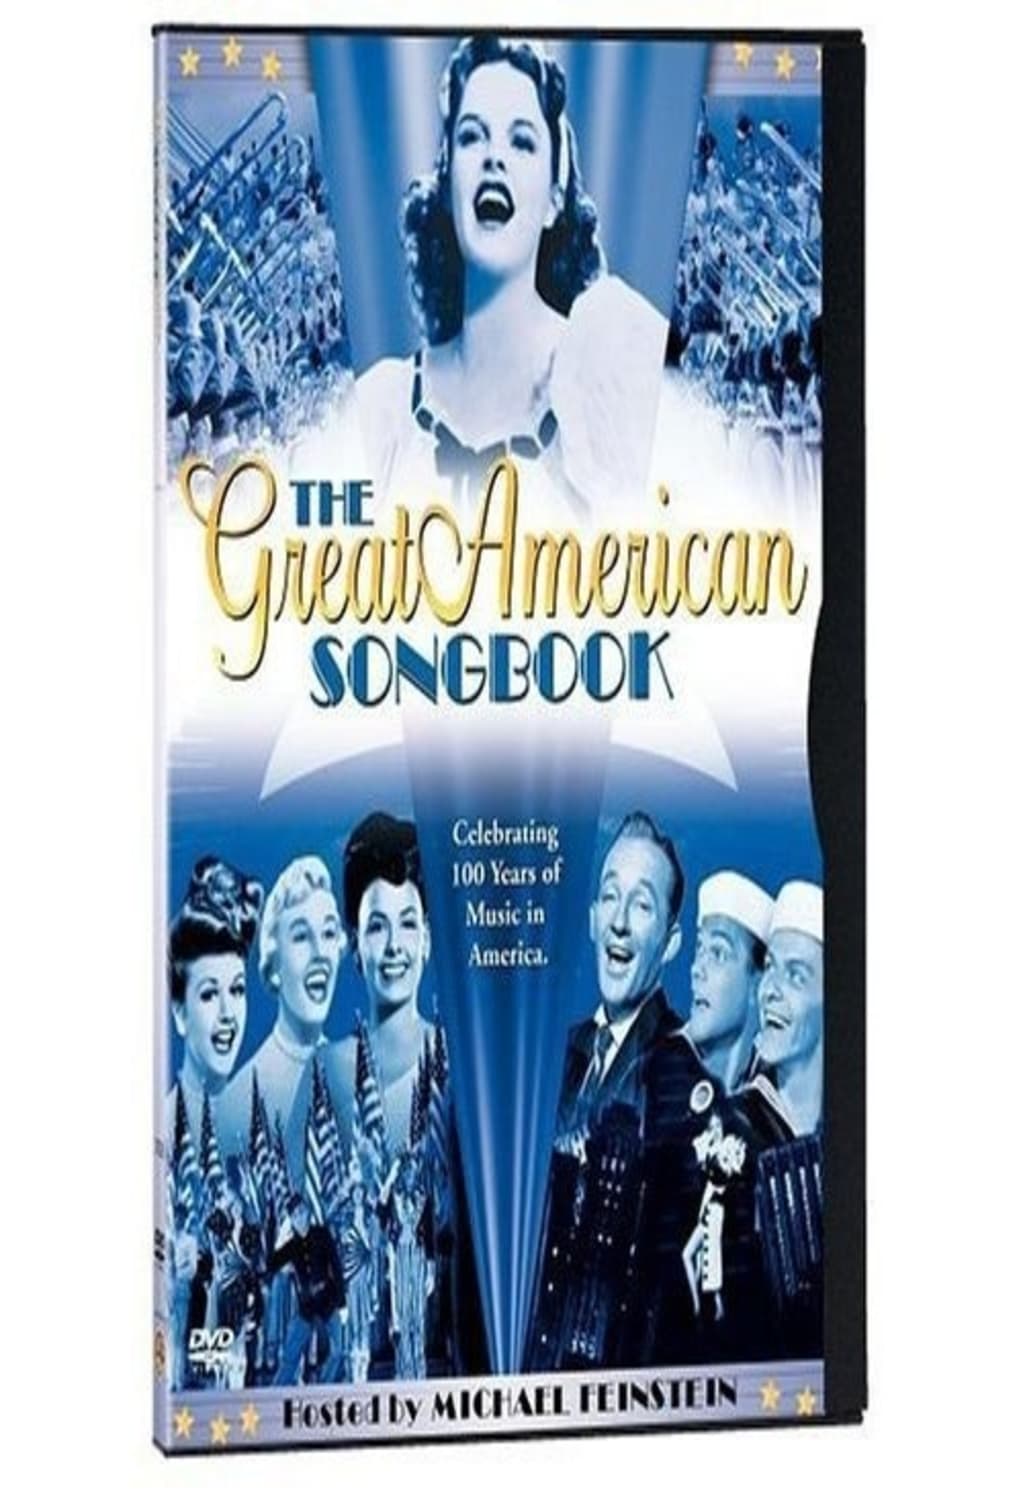 The Great American Songbook (DVD) on MovieShack